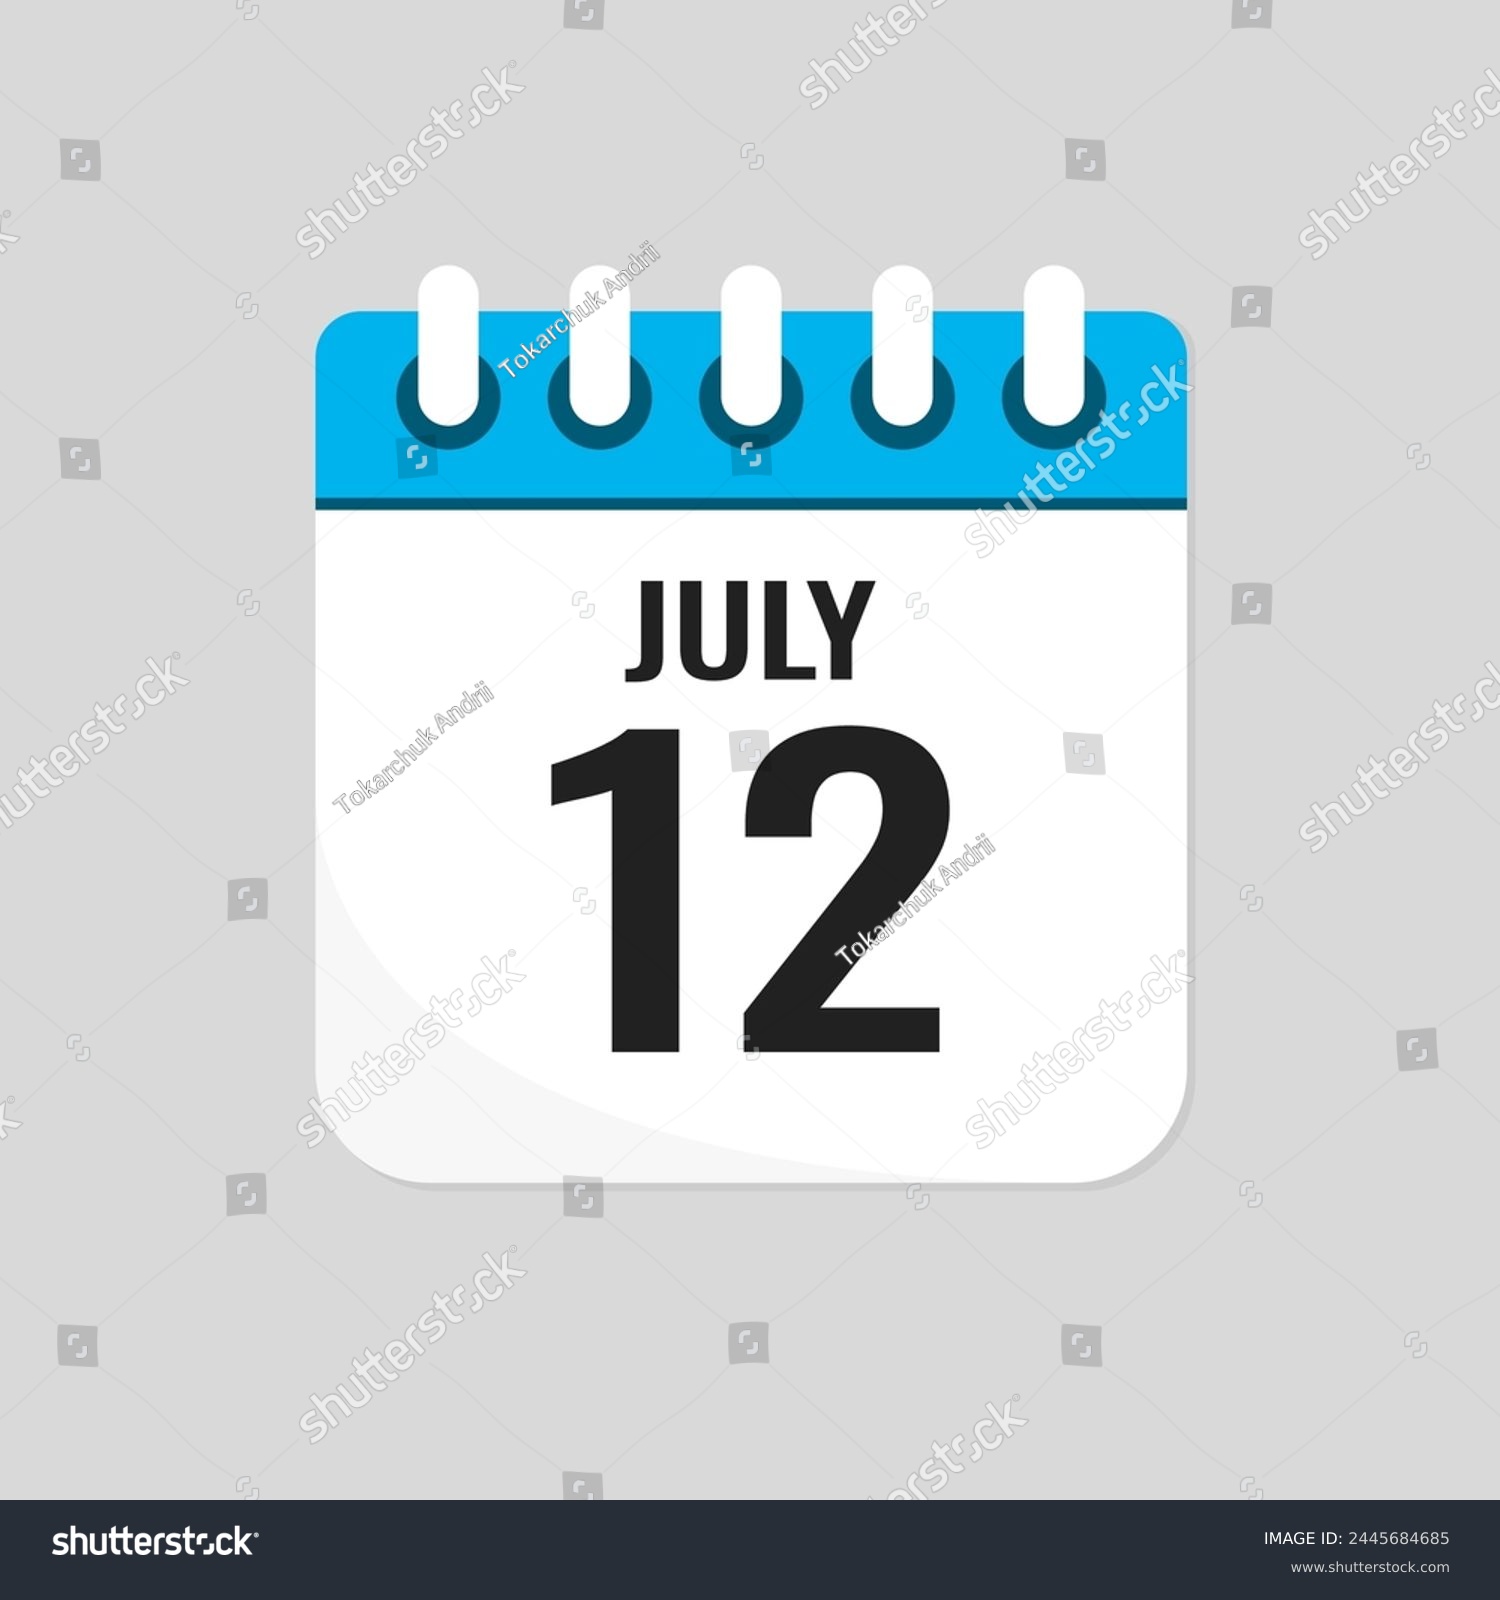 SVG of Vector icon page calendar day of month - 12 July. 12th day of month - Sunday, Monday, Tuesday, Wednesday, Thursday, Friday, Saturday. Anniversary, reminder, plan, to-do list. Calender on the wall svg